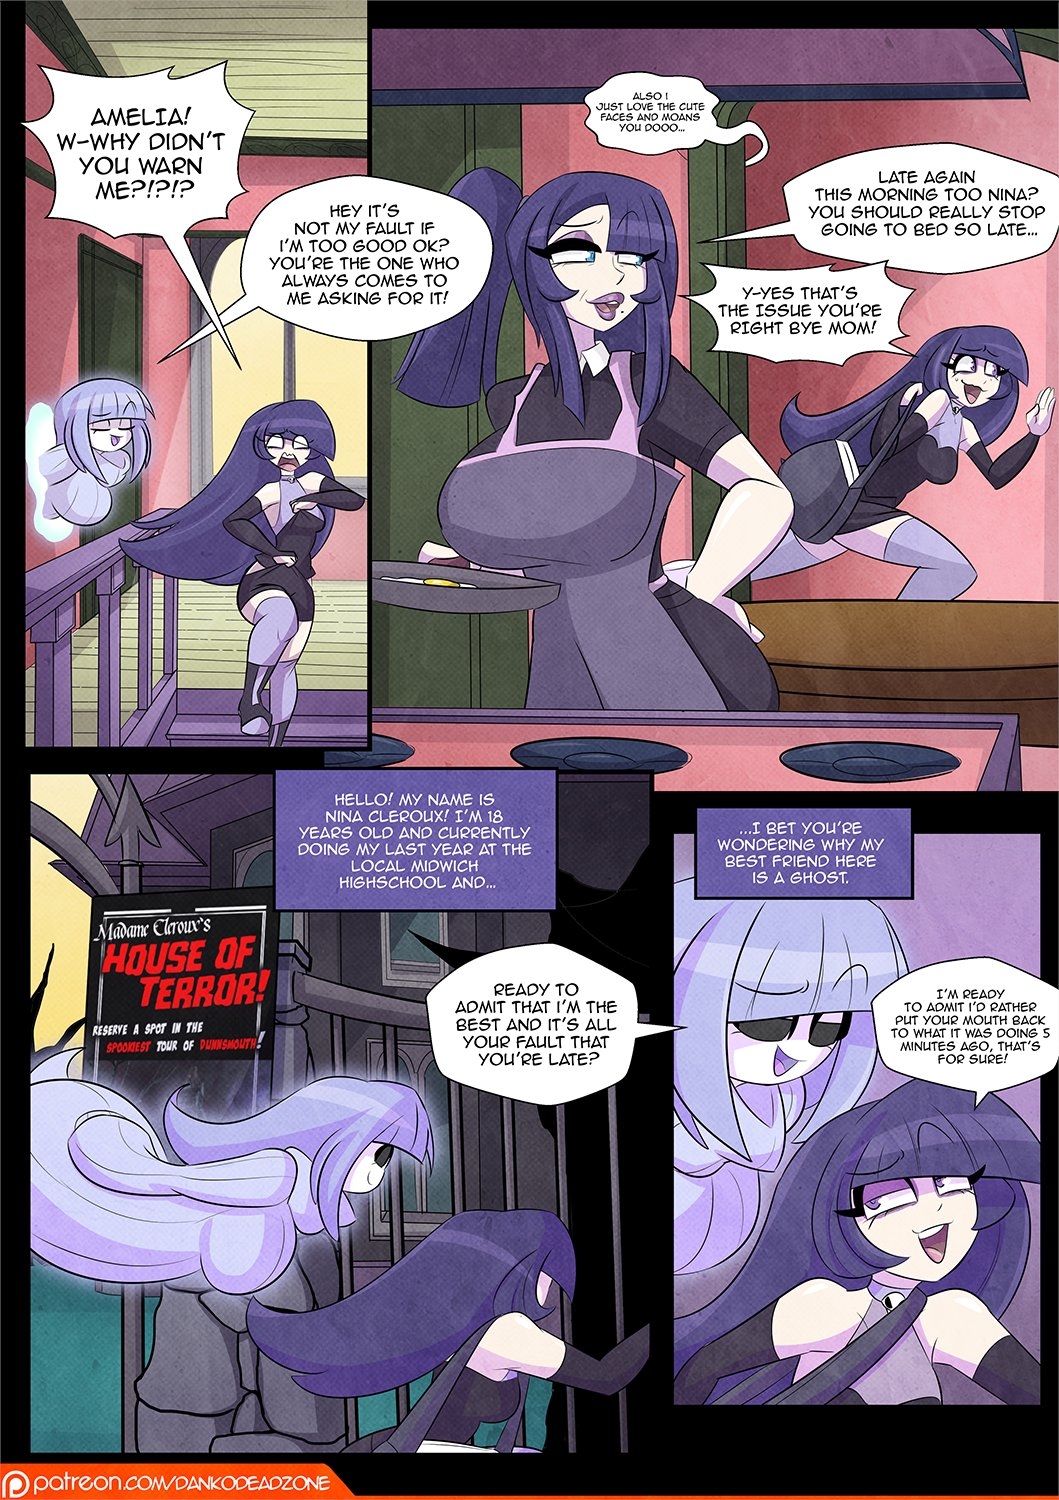 [DankoDeadZone] Lady of the Night Issue 1 [Ongoing] 4